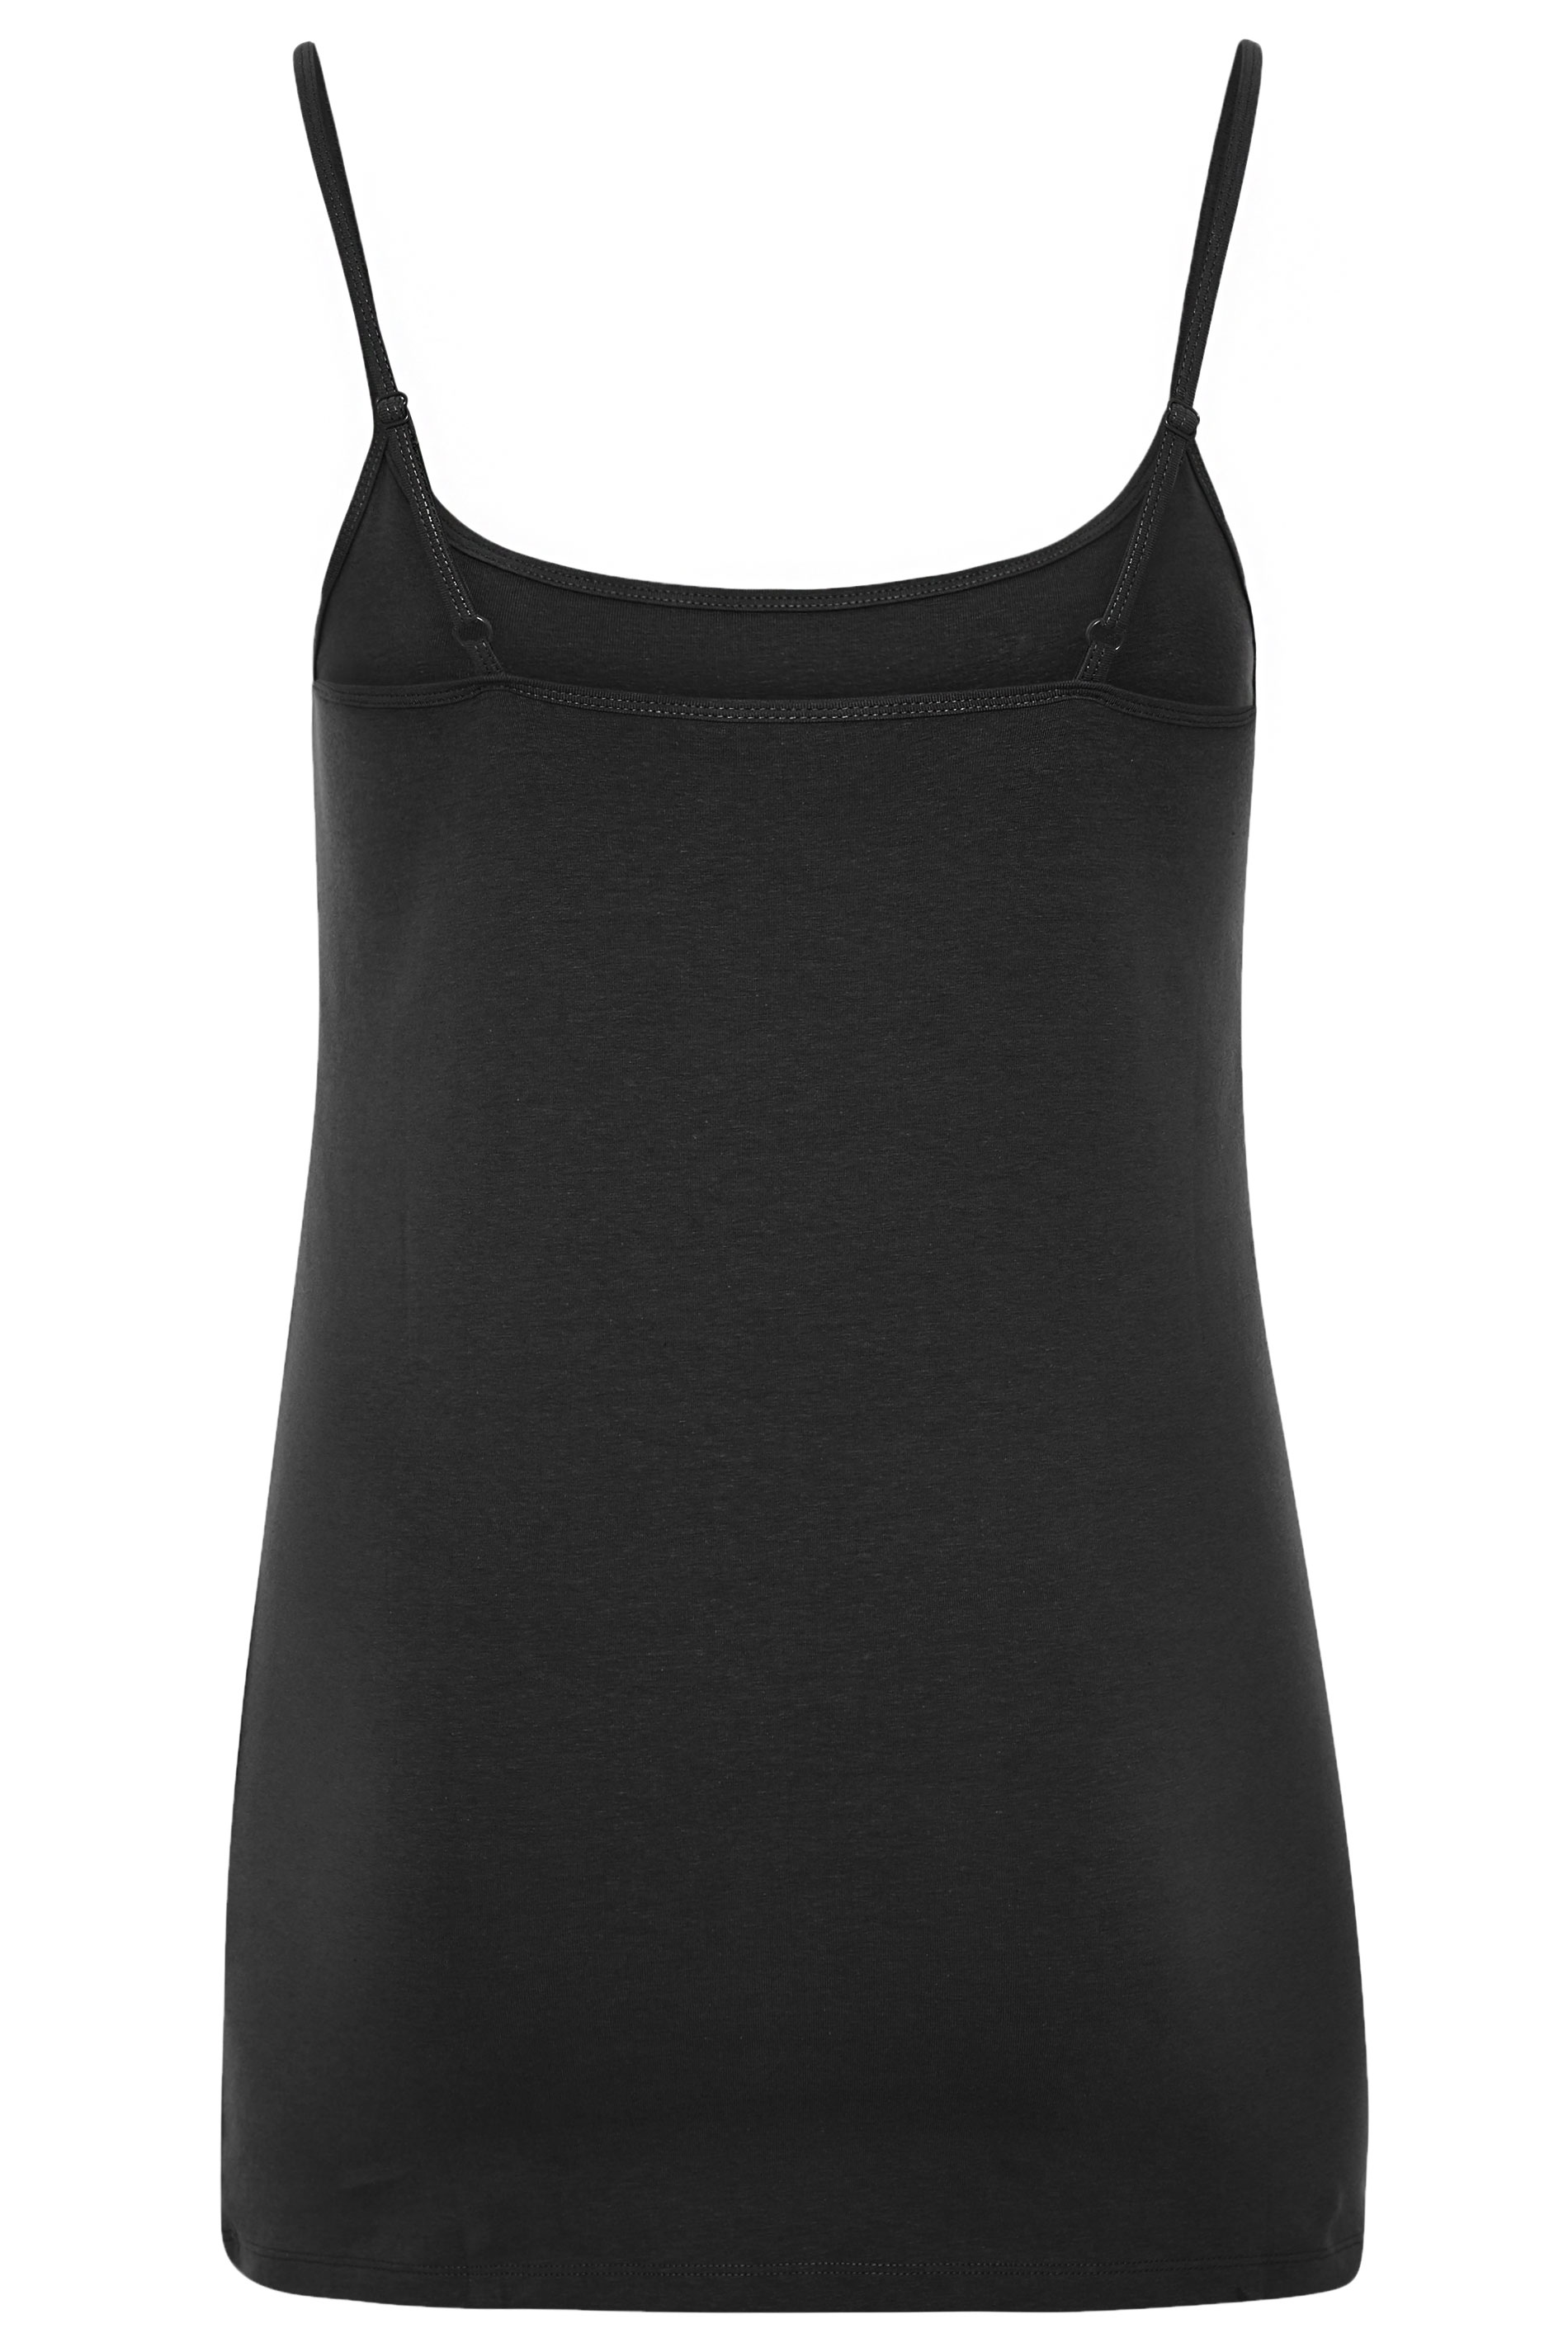 YOURS Curve Black Cami Top